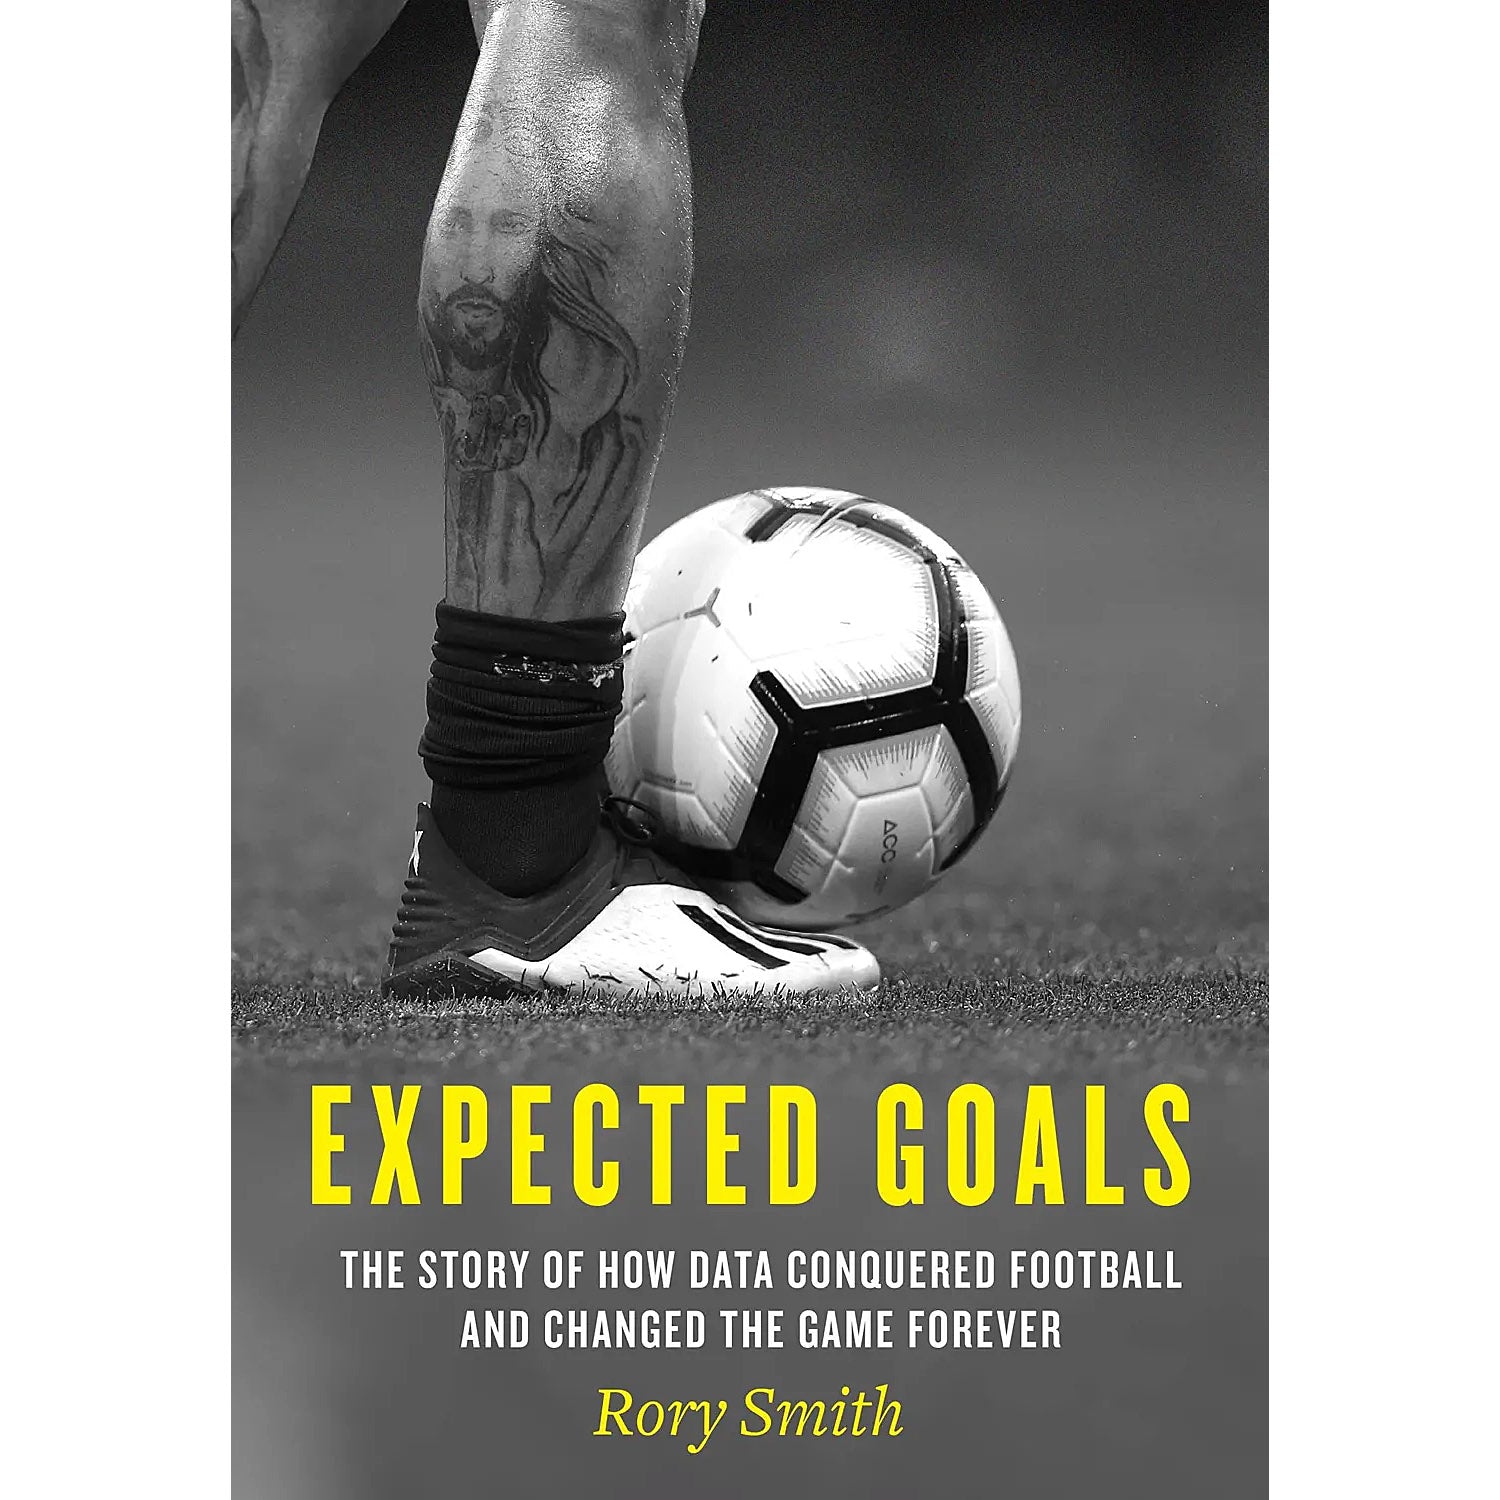 Expected Goals – The Story of How Data Conquered Football and Changed the Game Forever